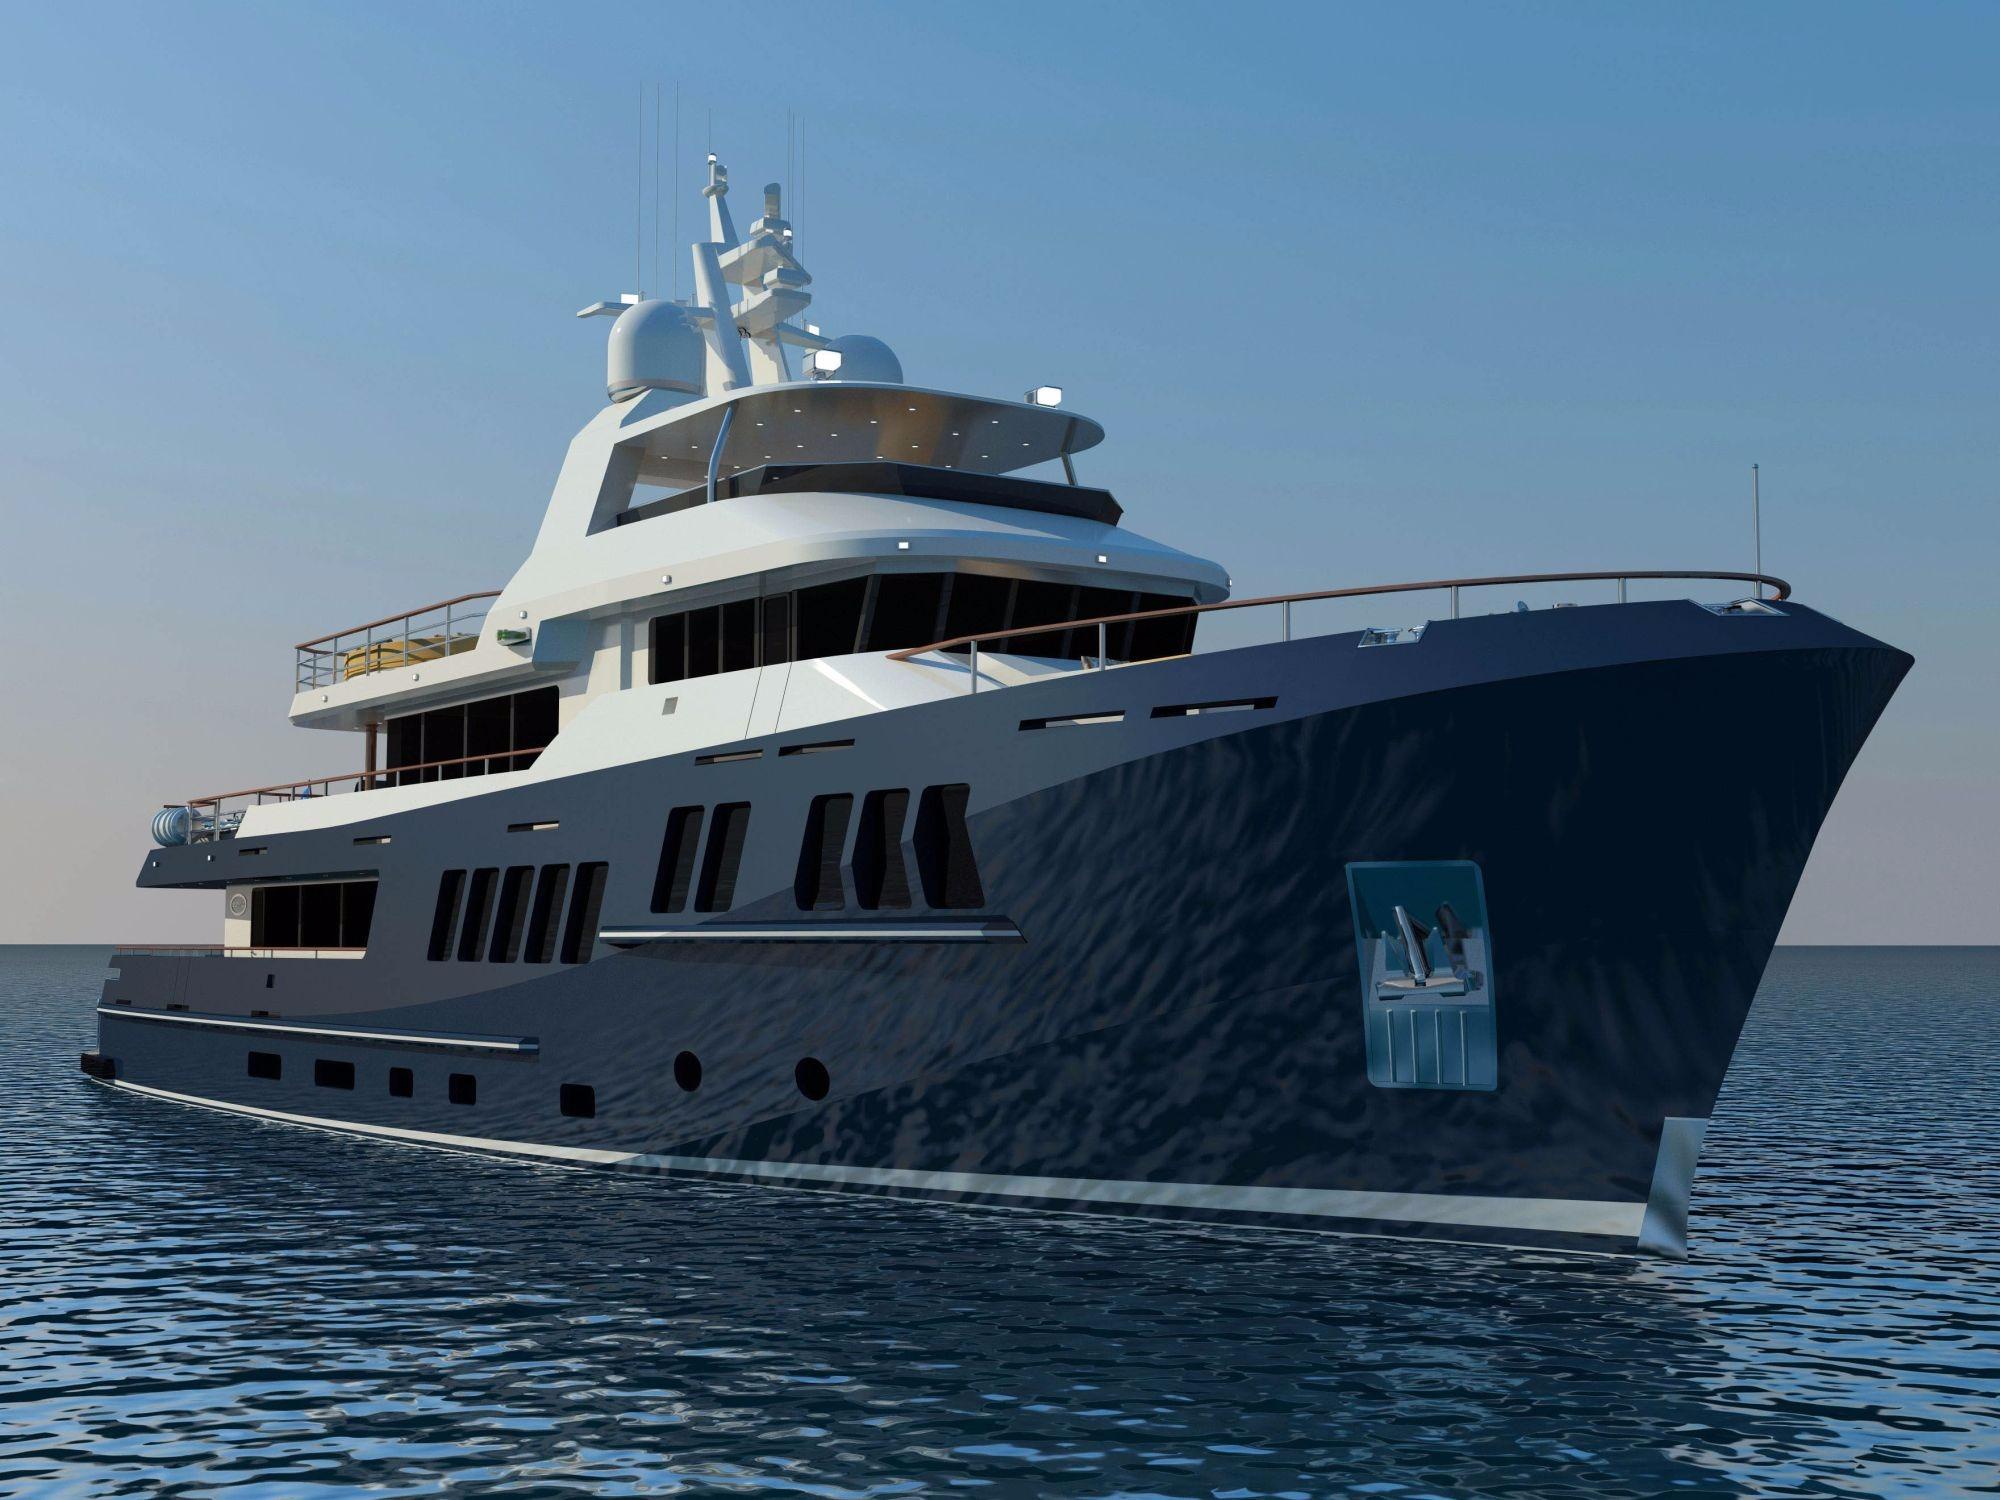 130 ft yacht cost